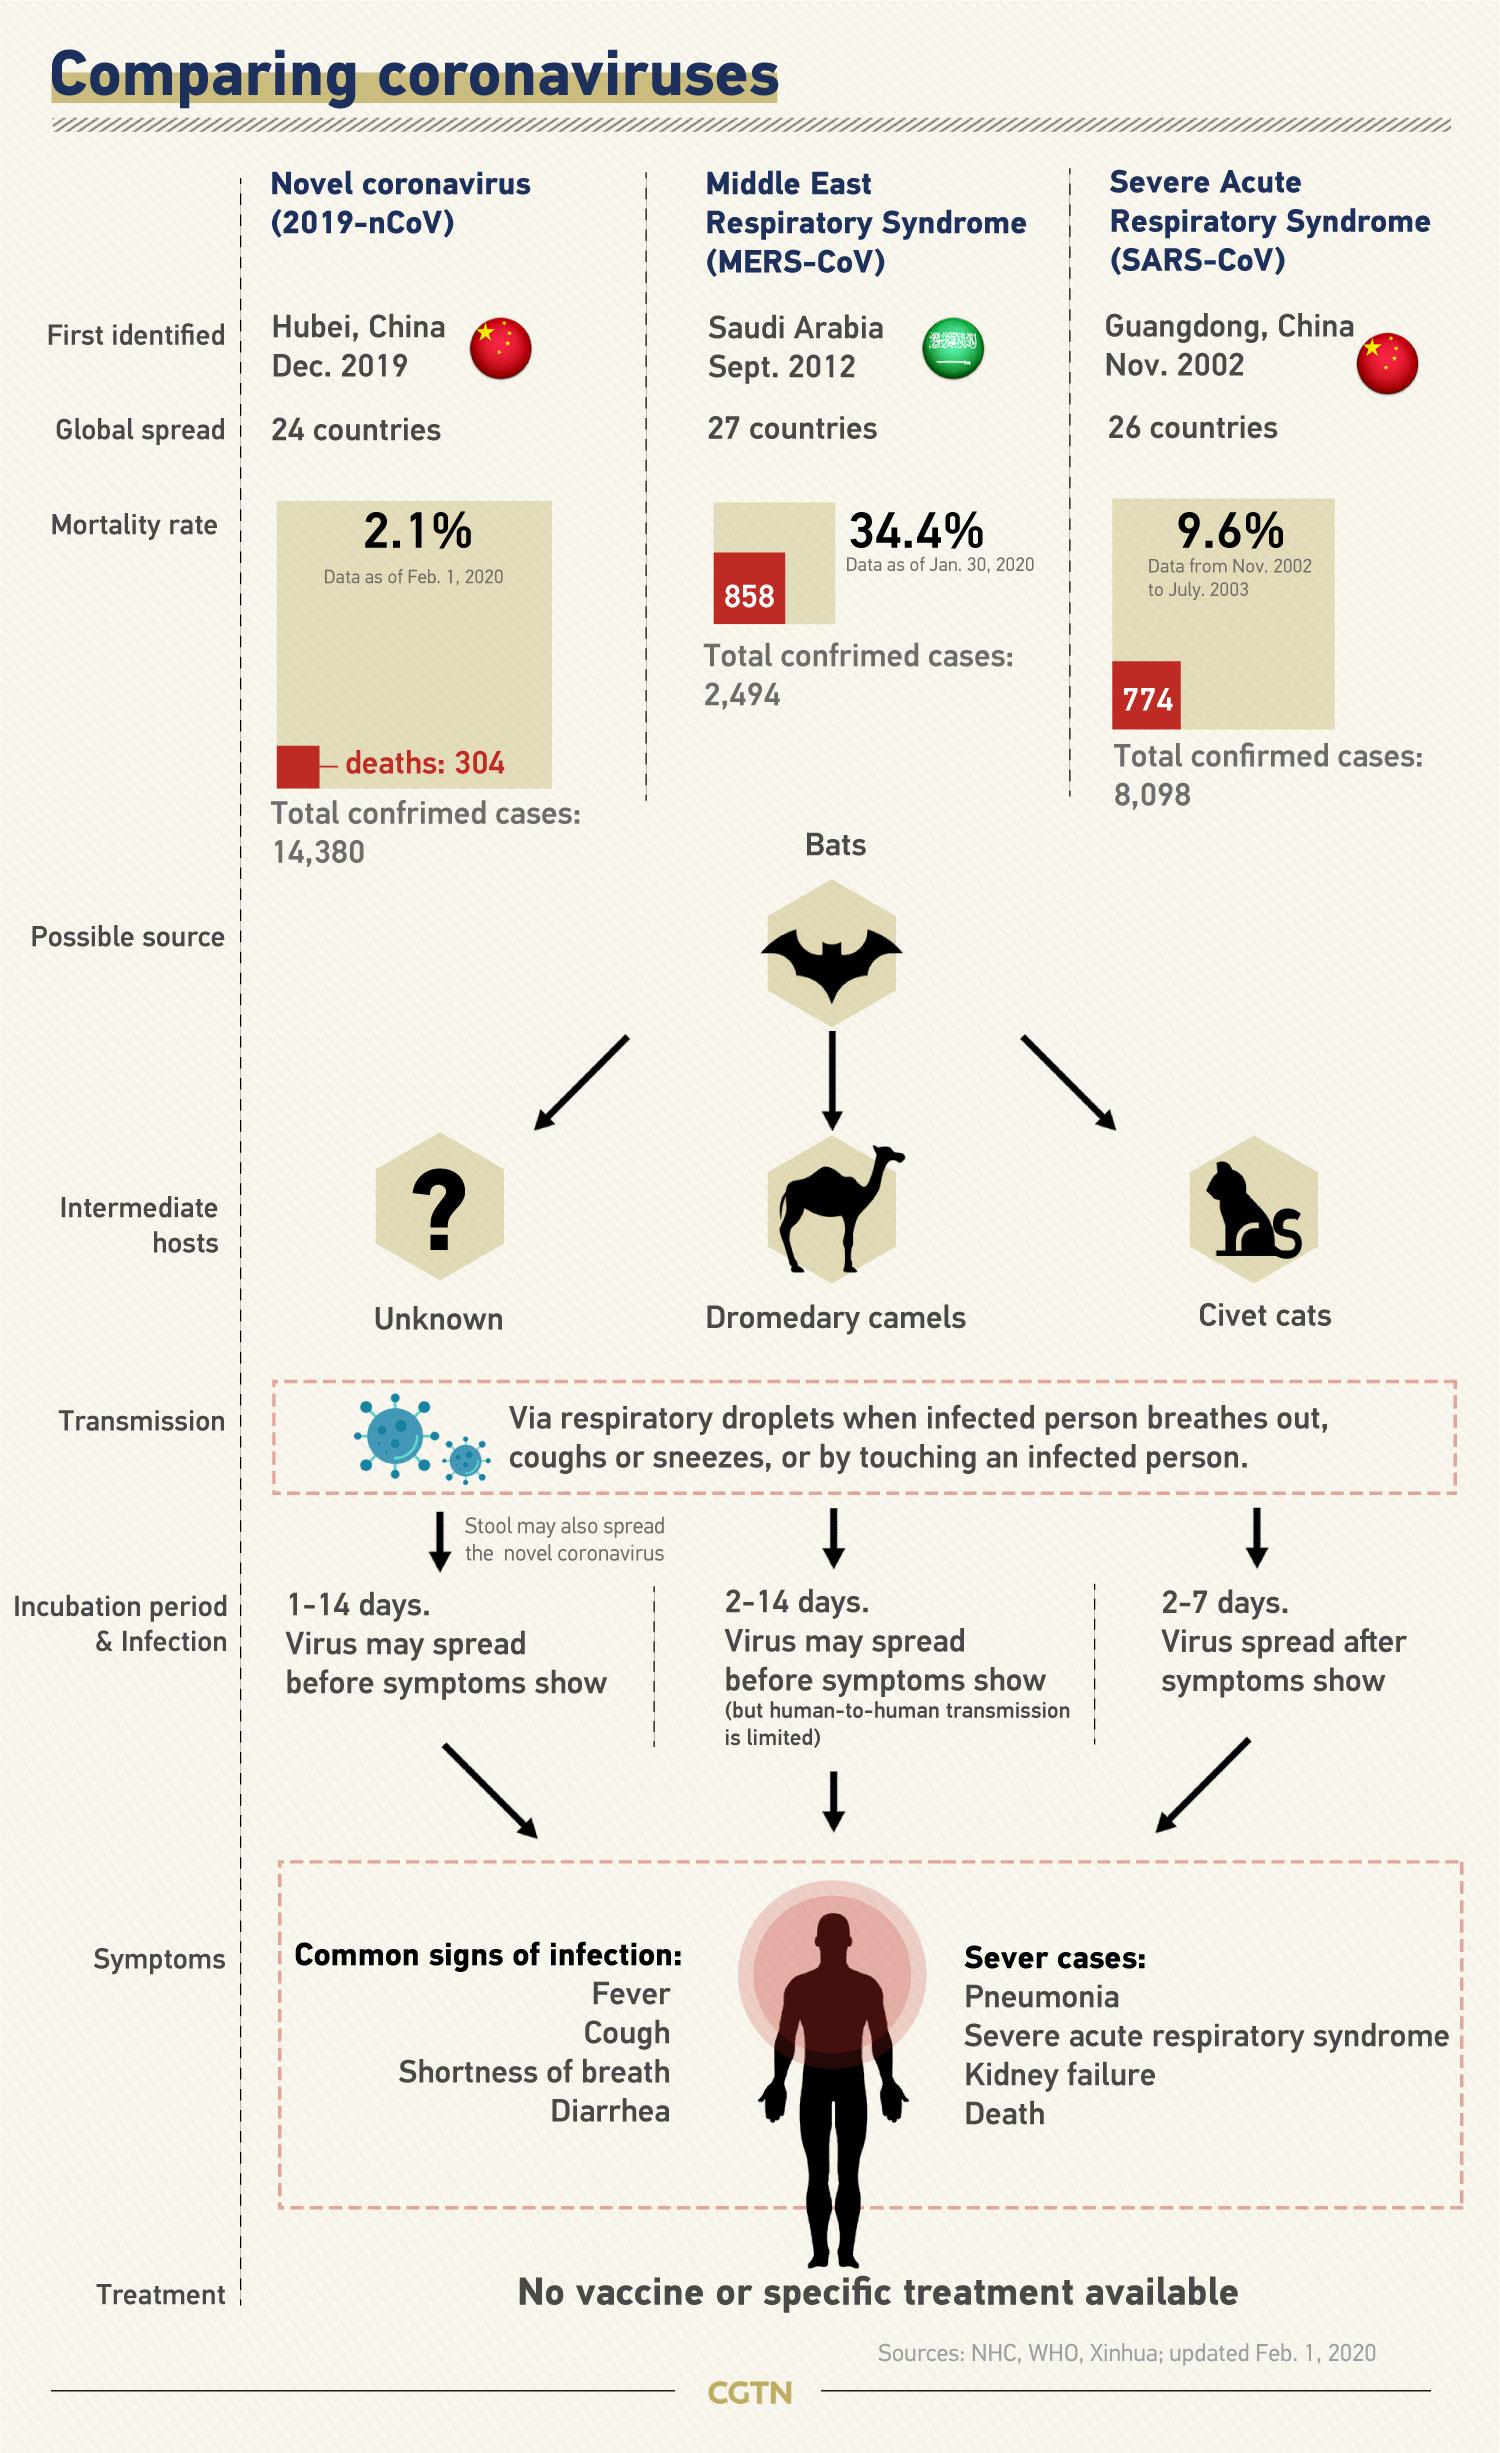 Graphics: All you need to know about the coronaviruses - CGTN